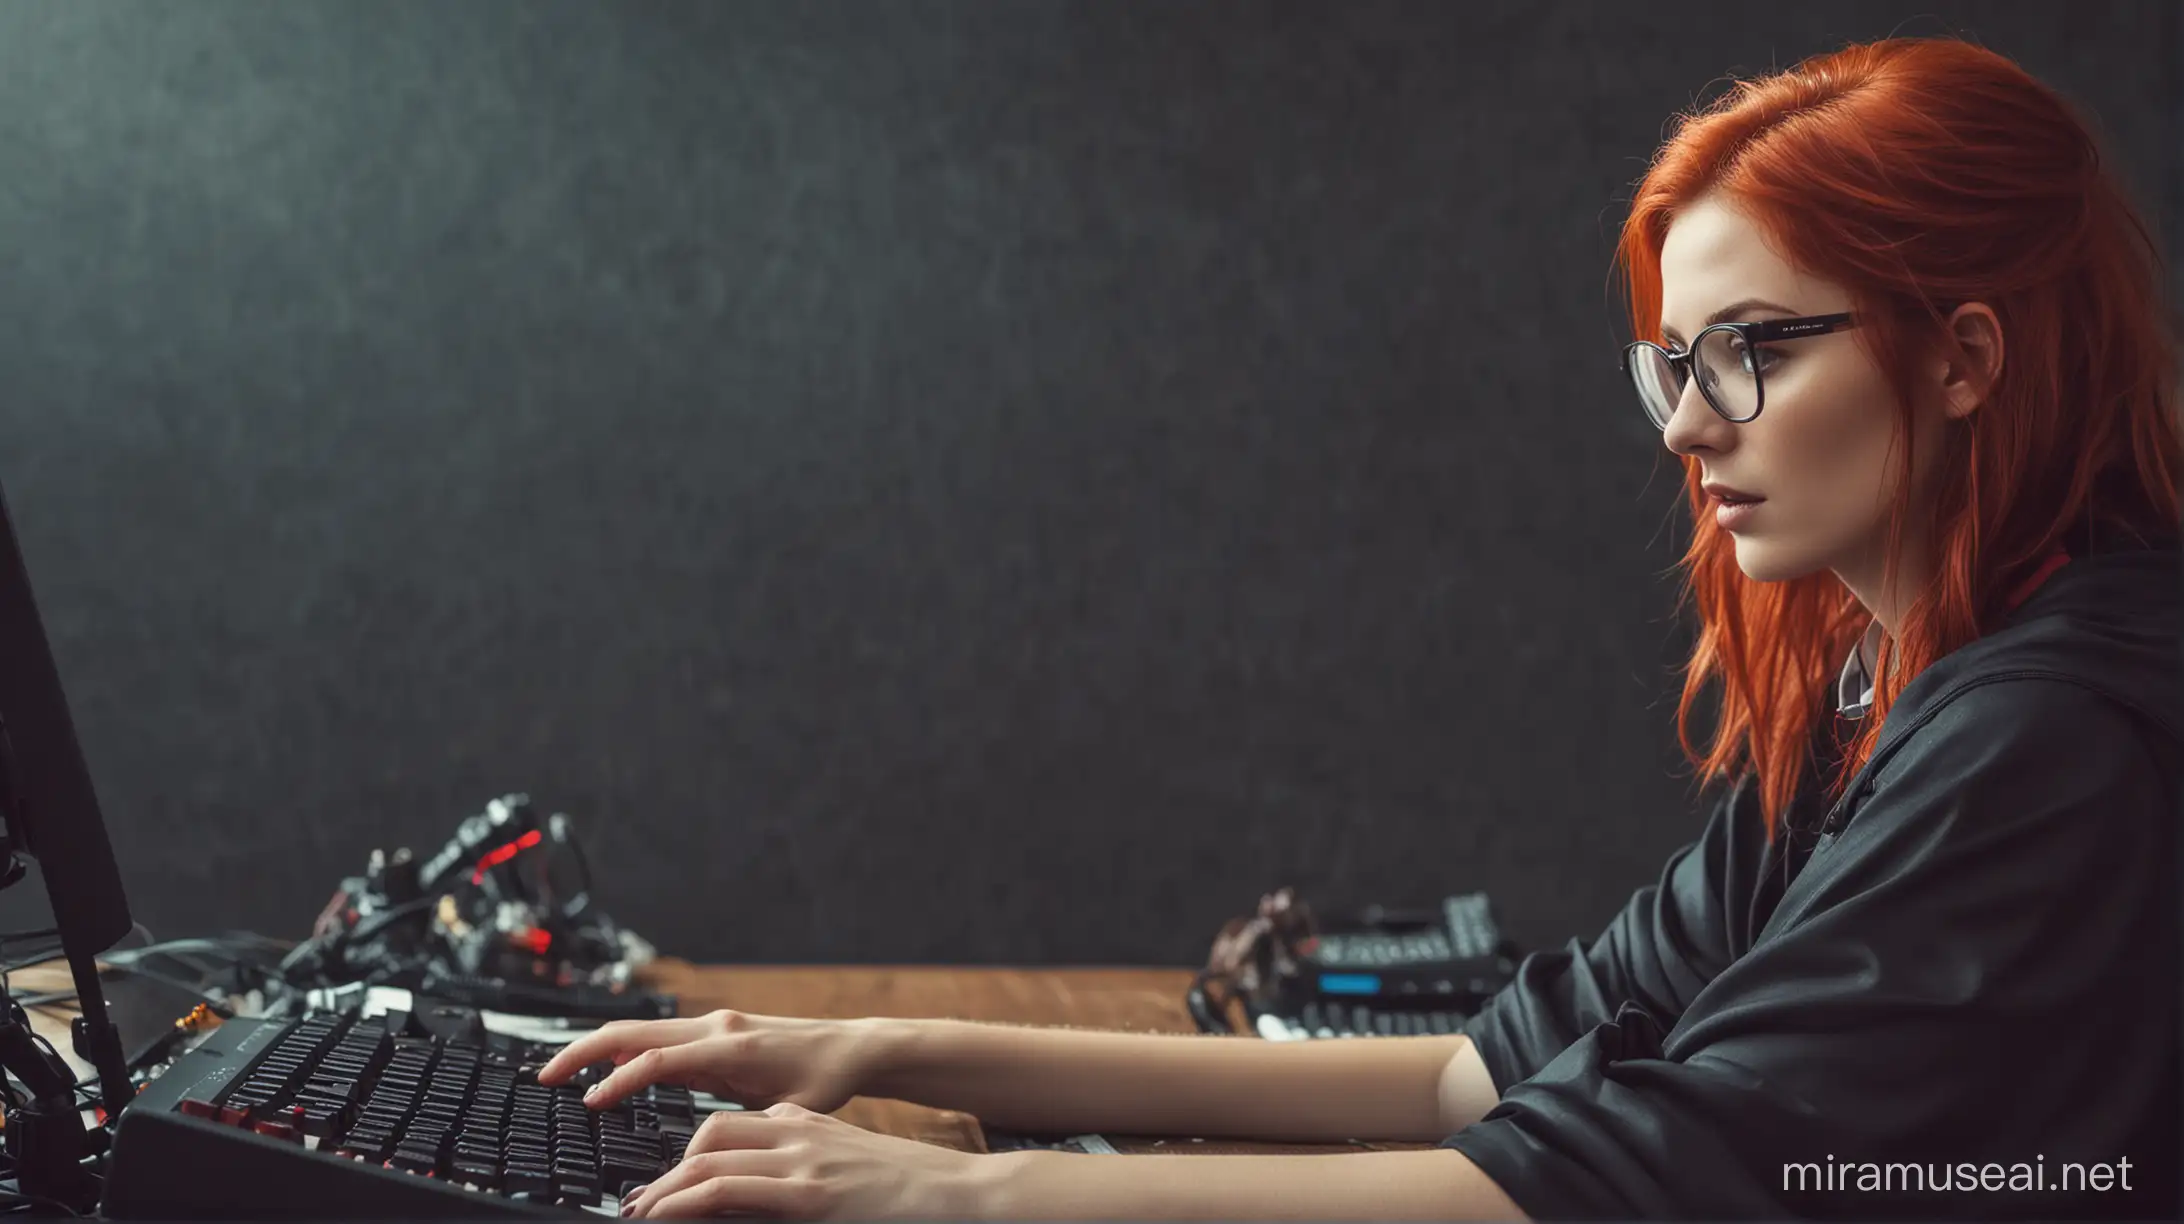 Mysterious Hacker with Red Hair and Cape Glasses Typing on Keyboard